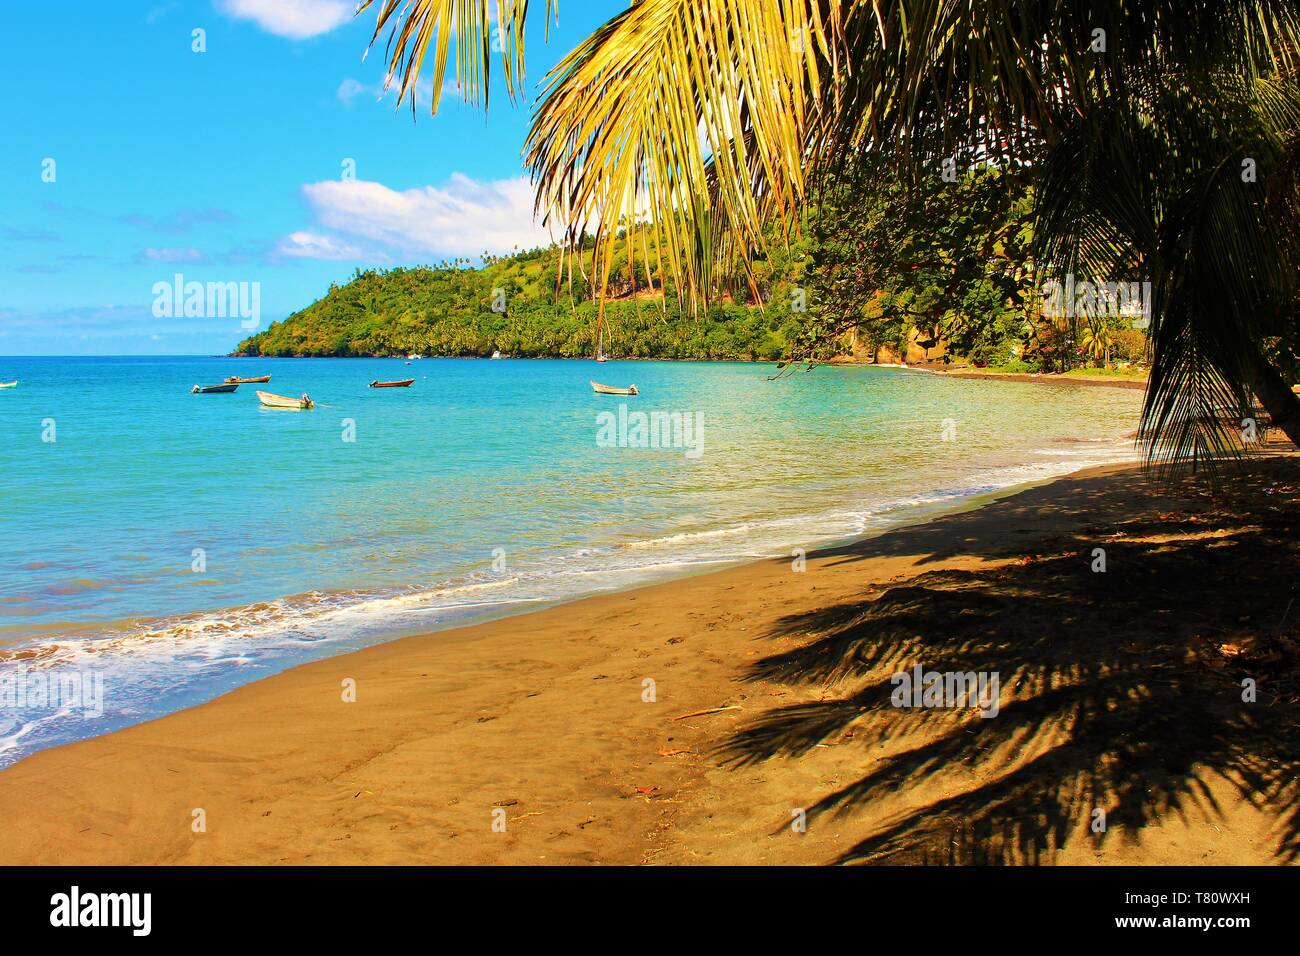 A typical secluded beach on the Caribbean island of St Vincent. Stock Photo